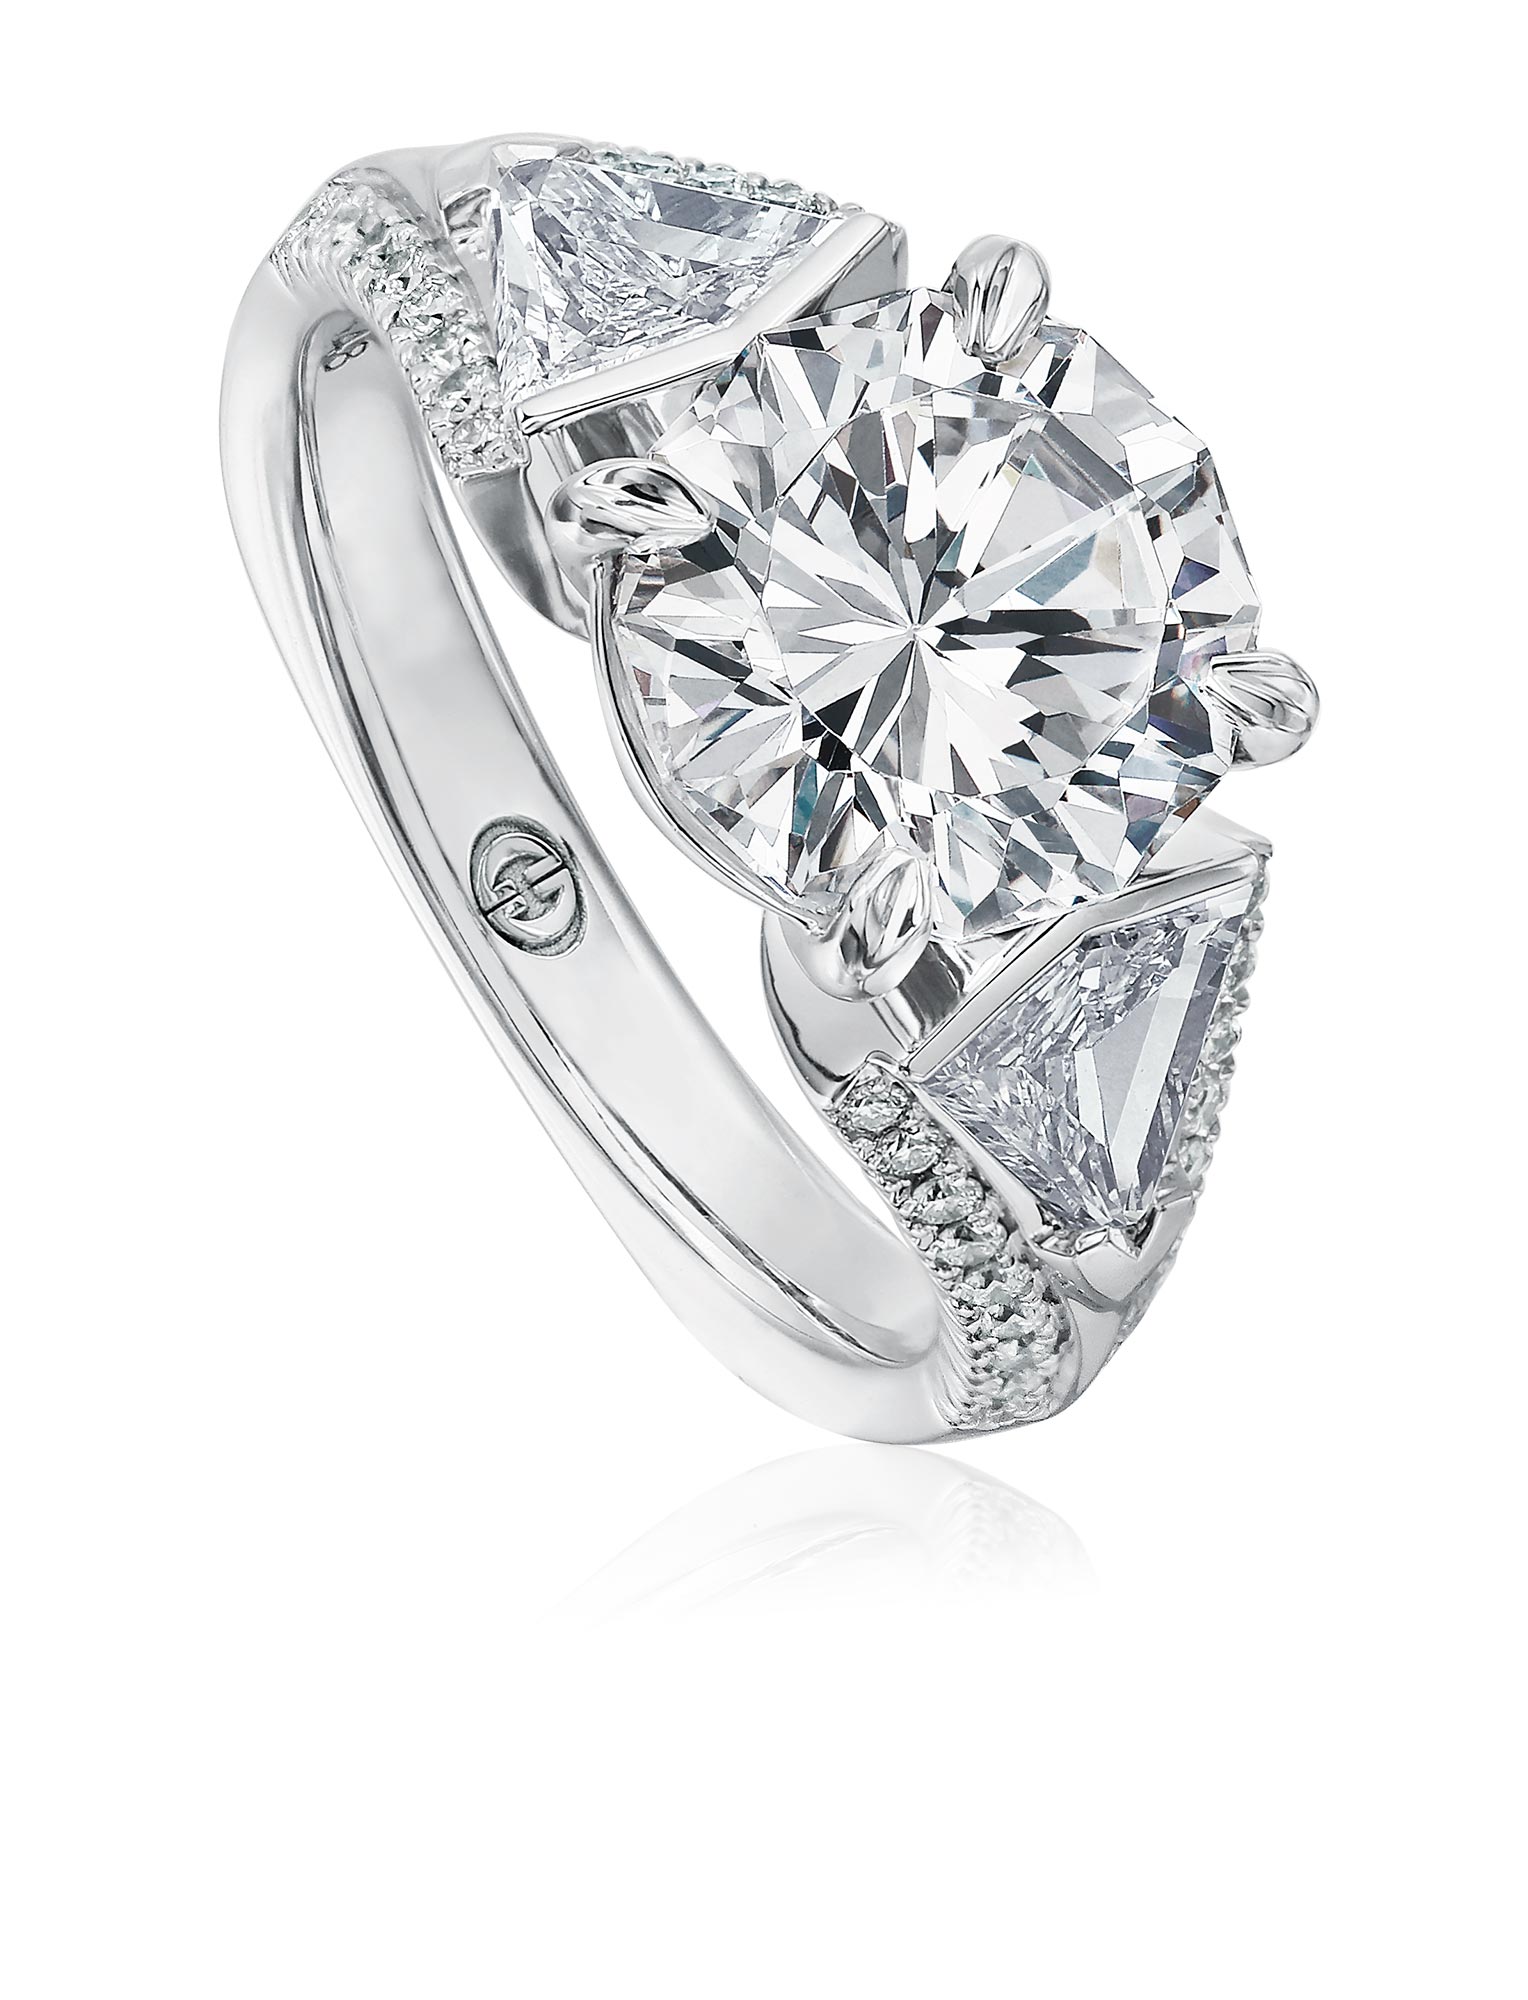 Round Diamond Solitaire Engagement Ring Setting With Unique Side